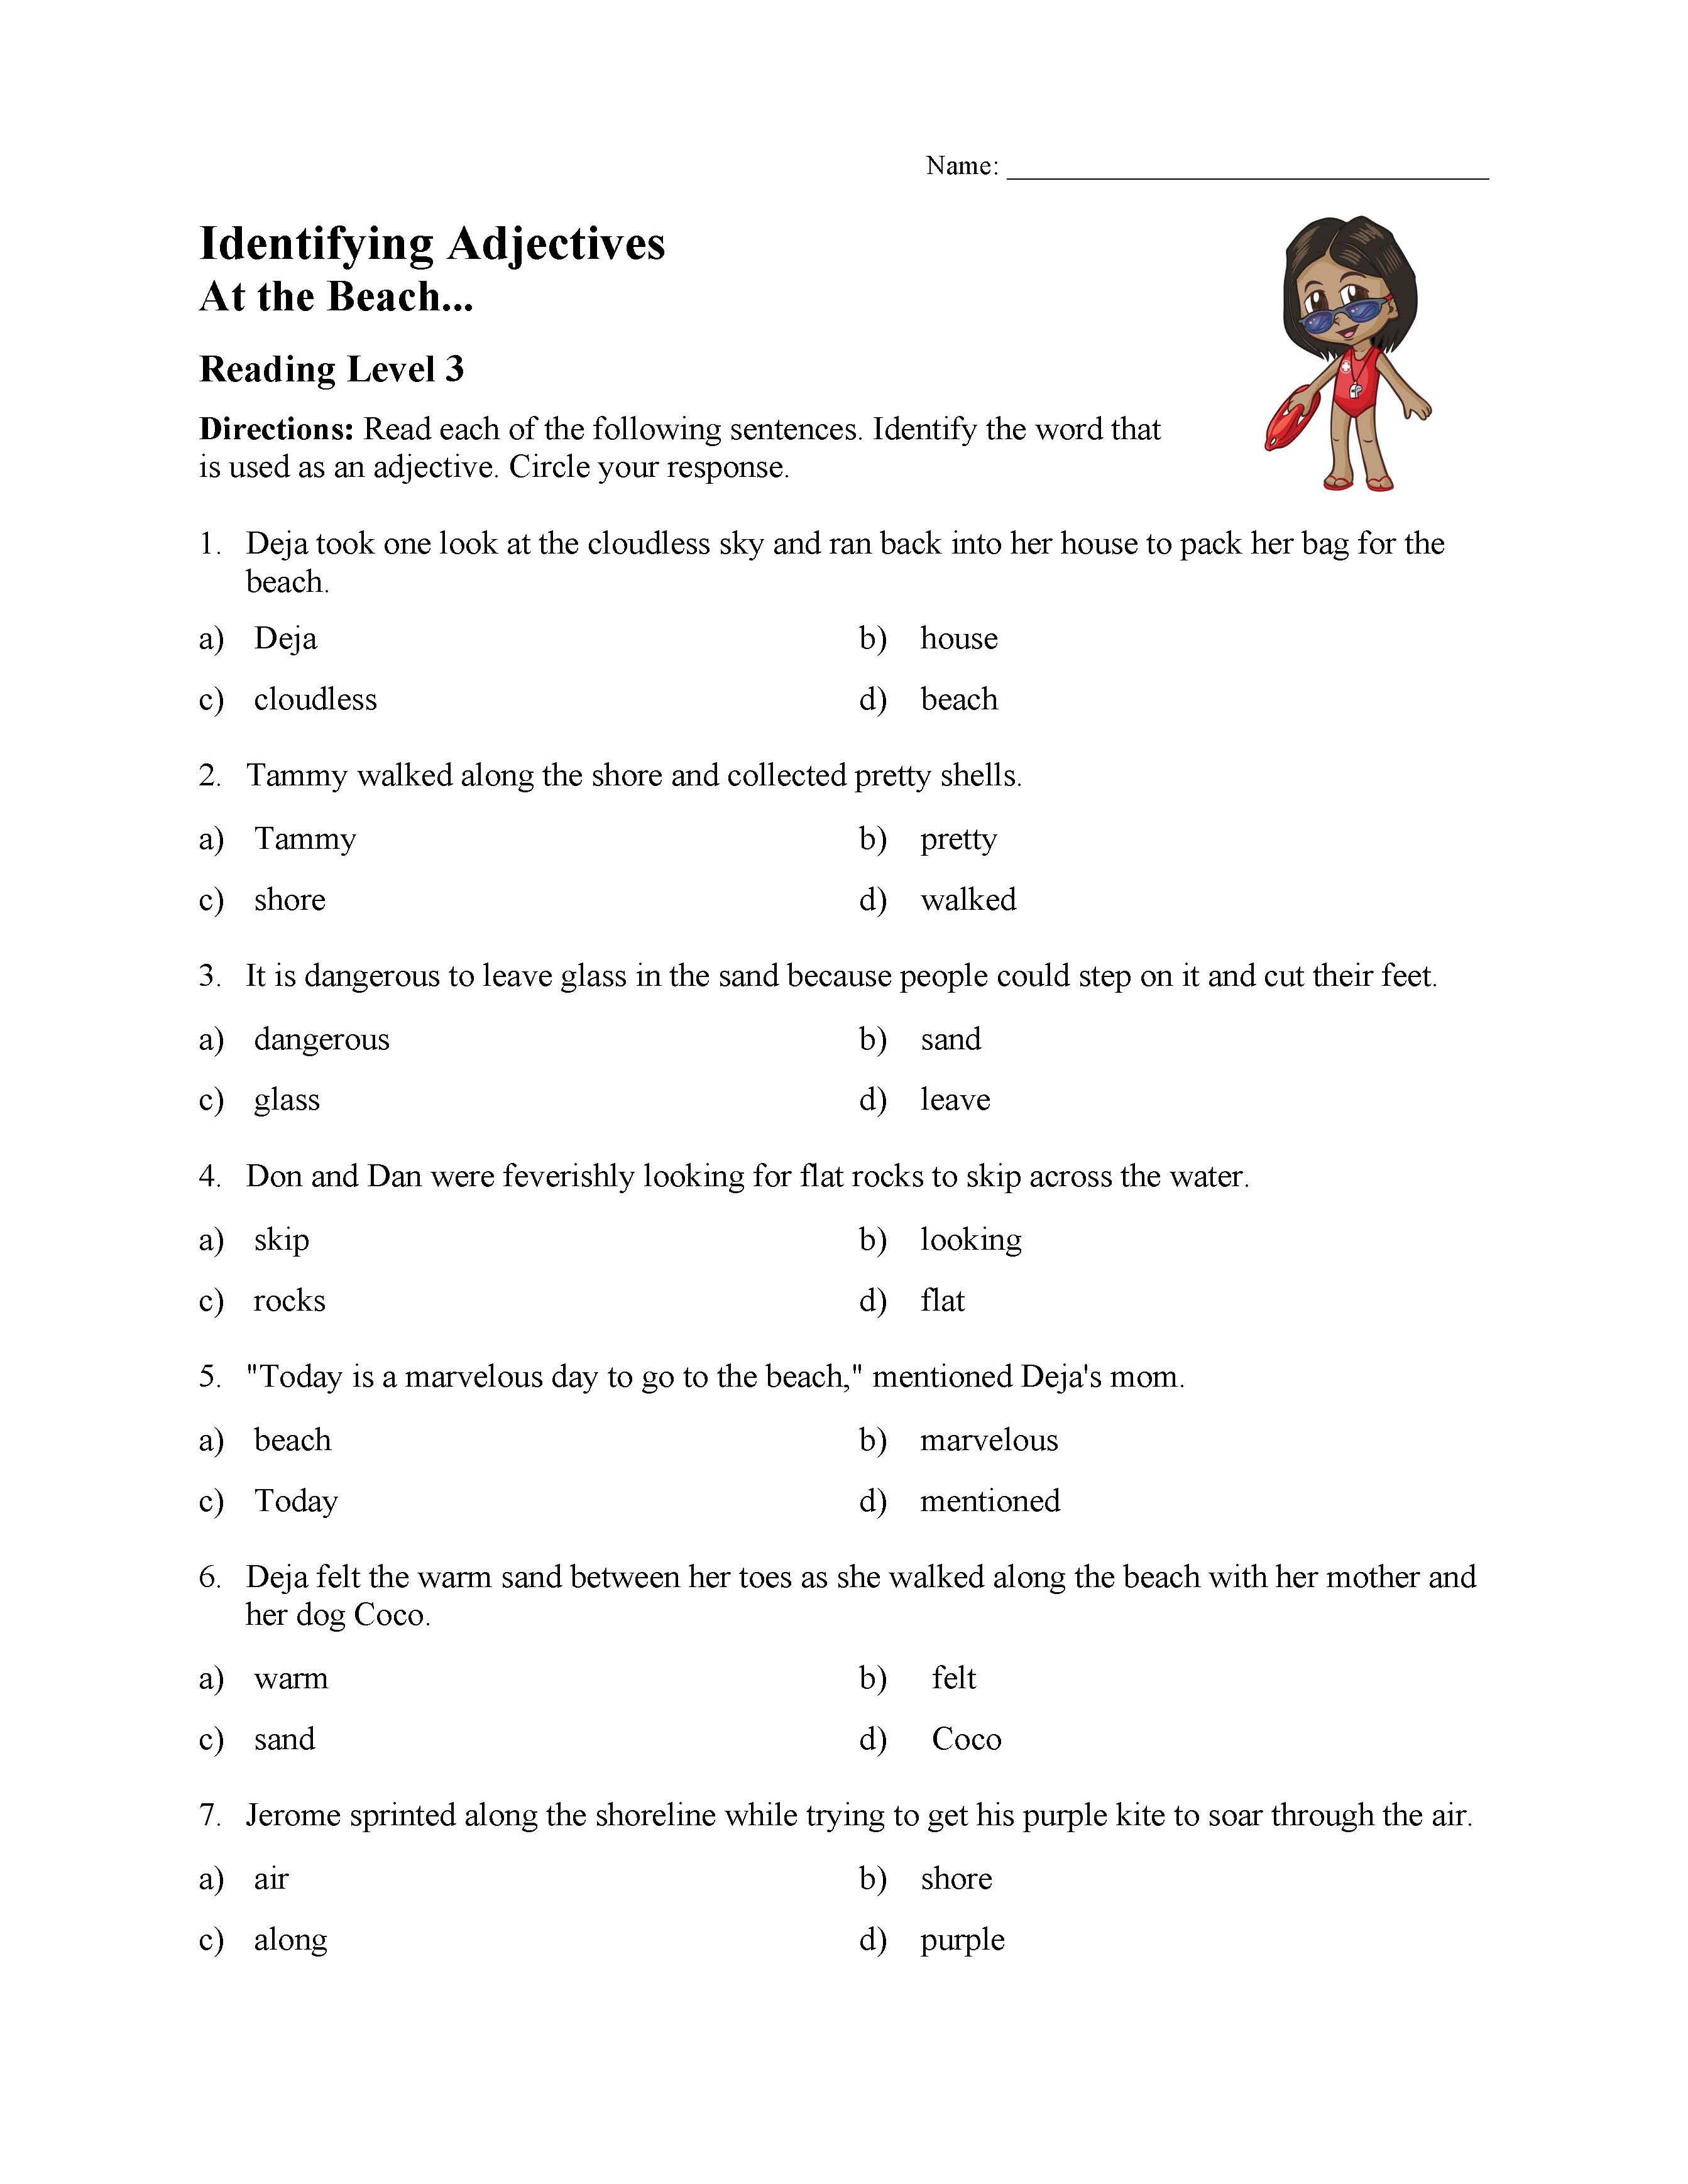 Identifying Adjectives Test 1 Reading Level 3 Preview